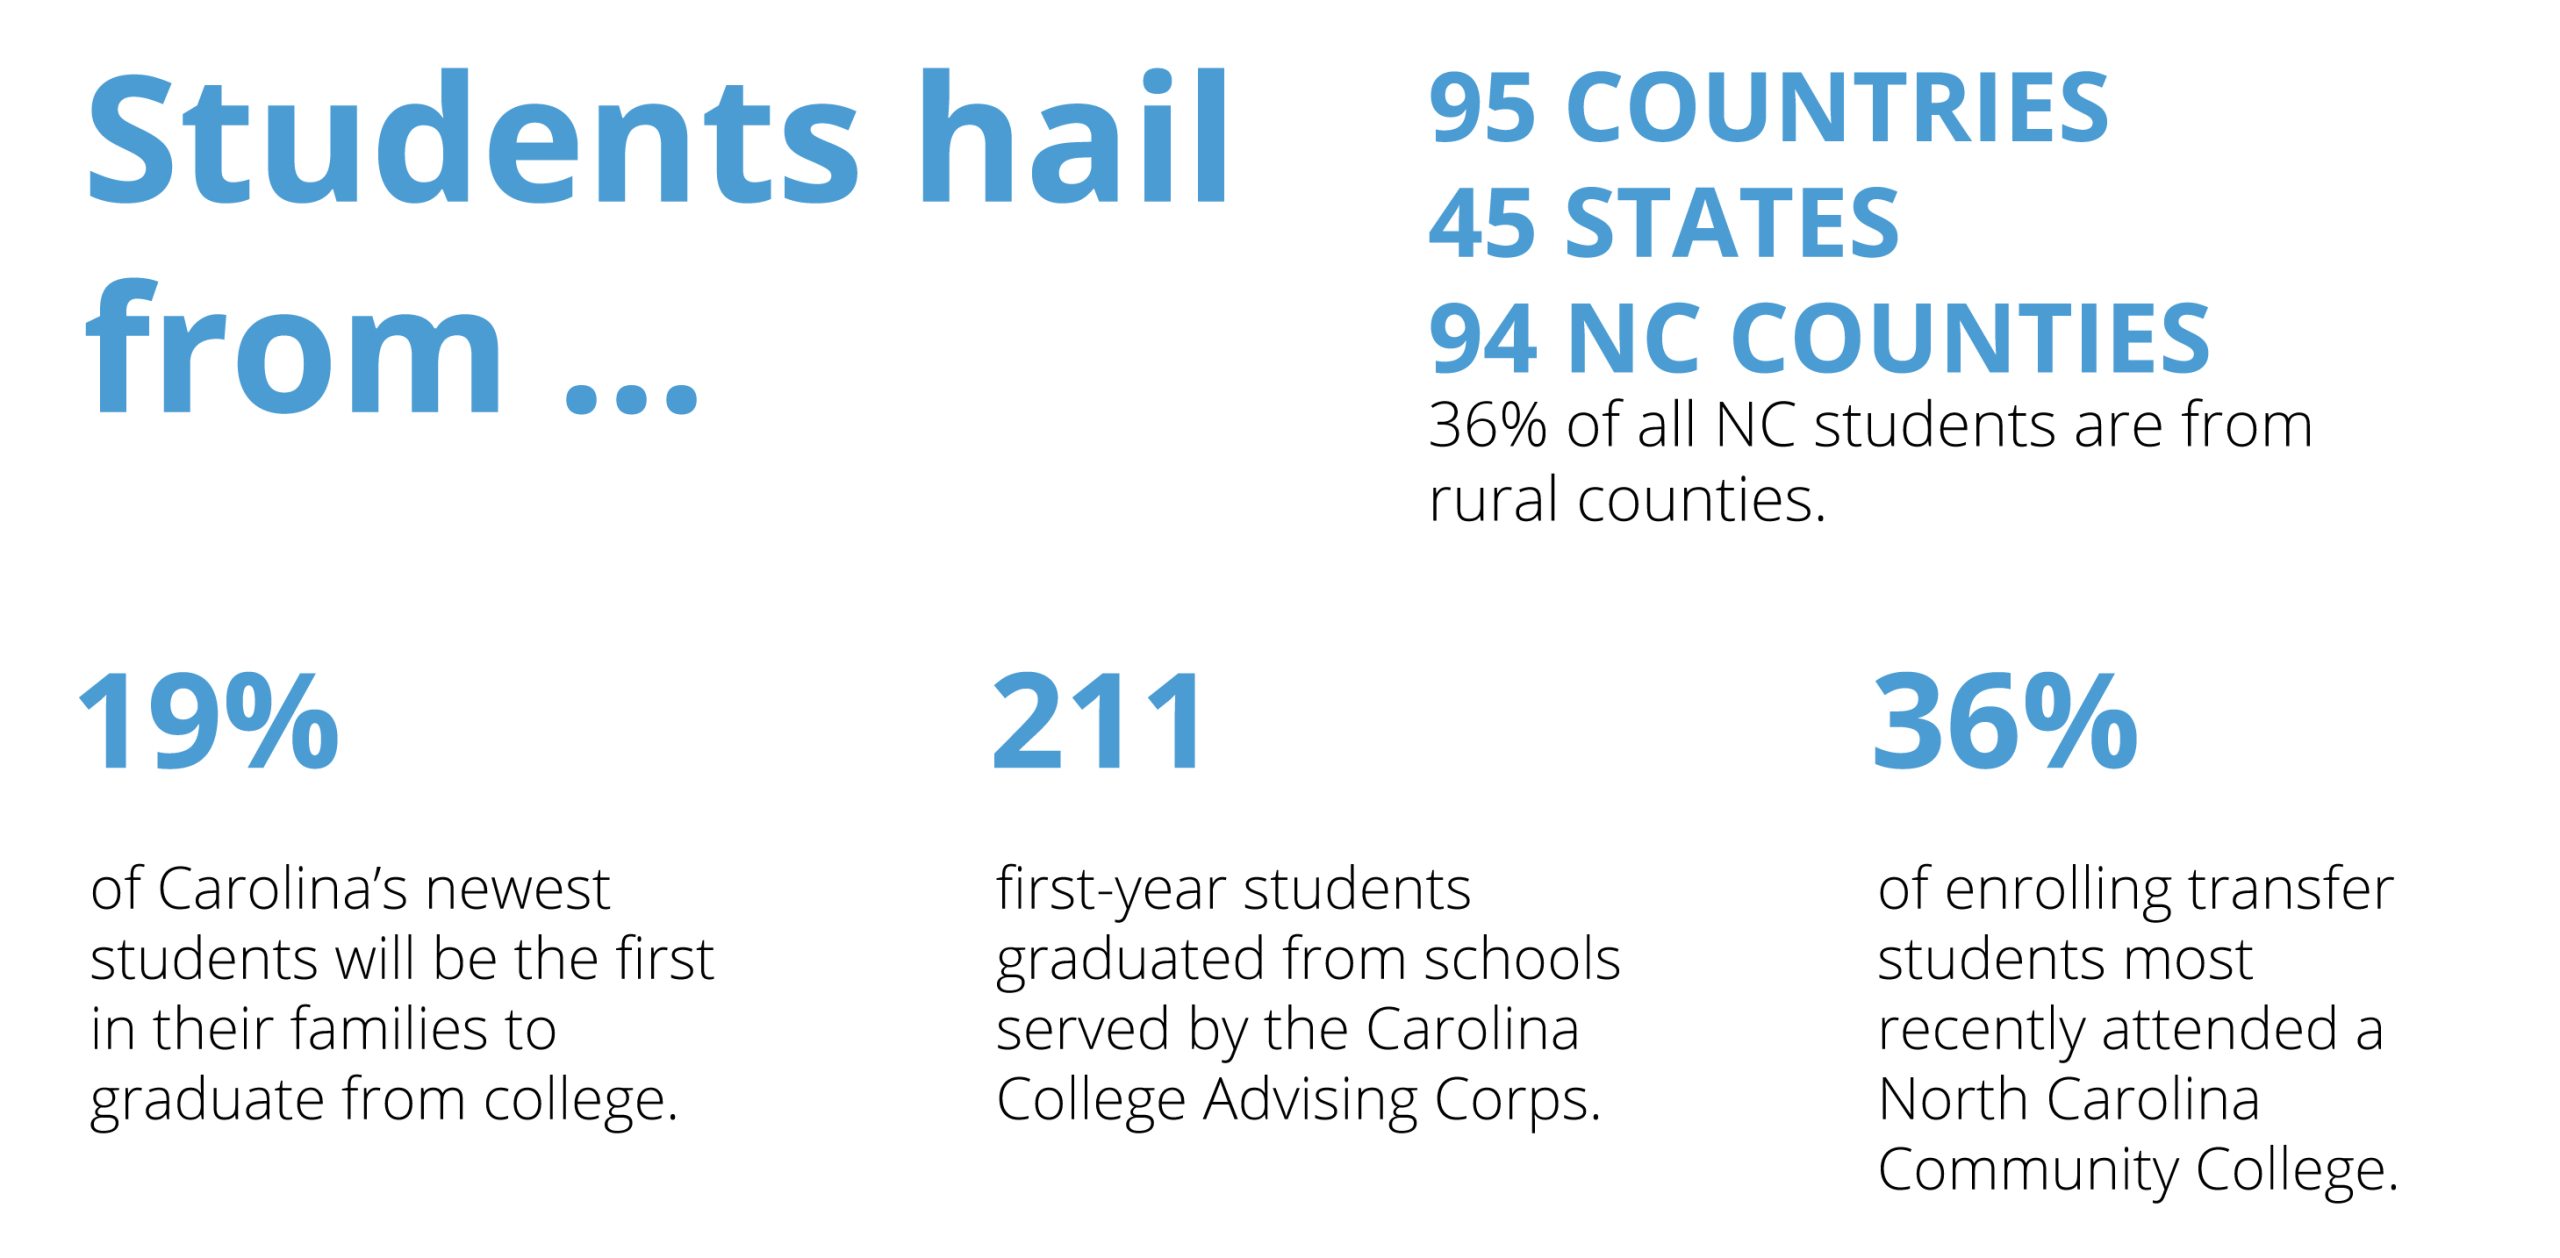 Students hail from 95 countries, 45 states and 94 of North Carolina’s 100 counties, with 36% of in-state students coming from rural counties. Nineteen percent will be the first in their families to graduate from college. 211 of Carolina’s newest students graduated from schools served by the Carolina College Advising Corps. Thirty-six percent of the transfer students most recently attended a North Carolina Community College.